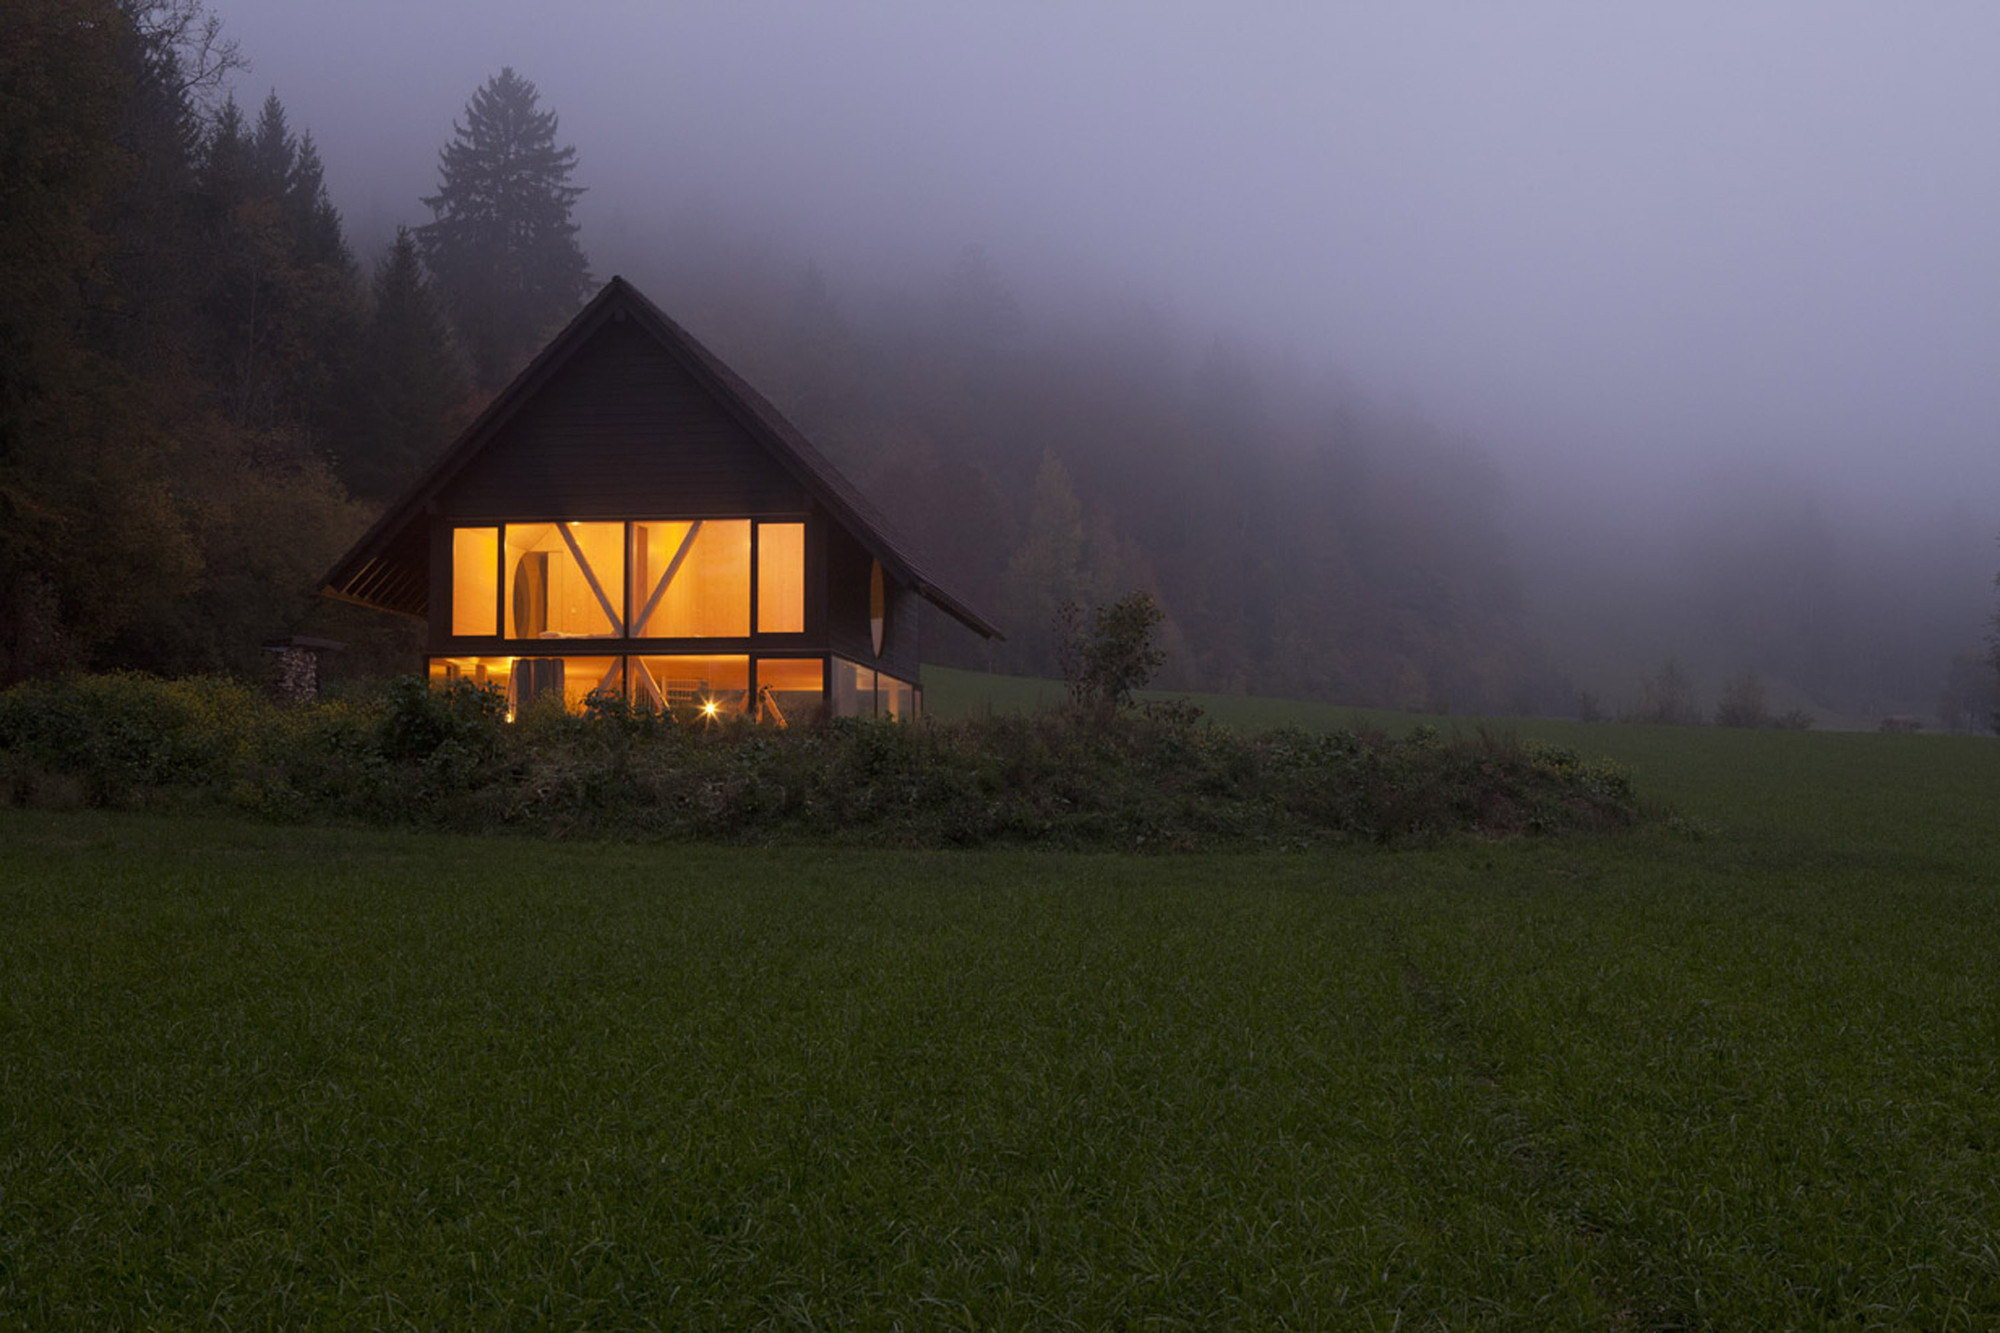 Timber House in Balsthal by Pascal Flammer